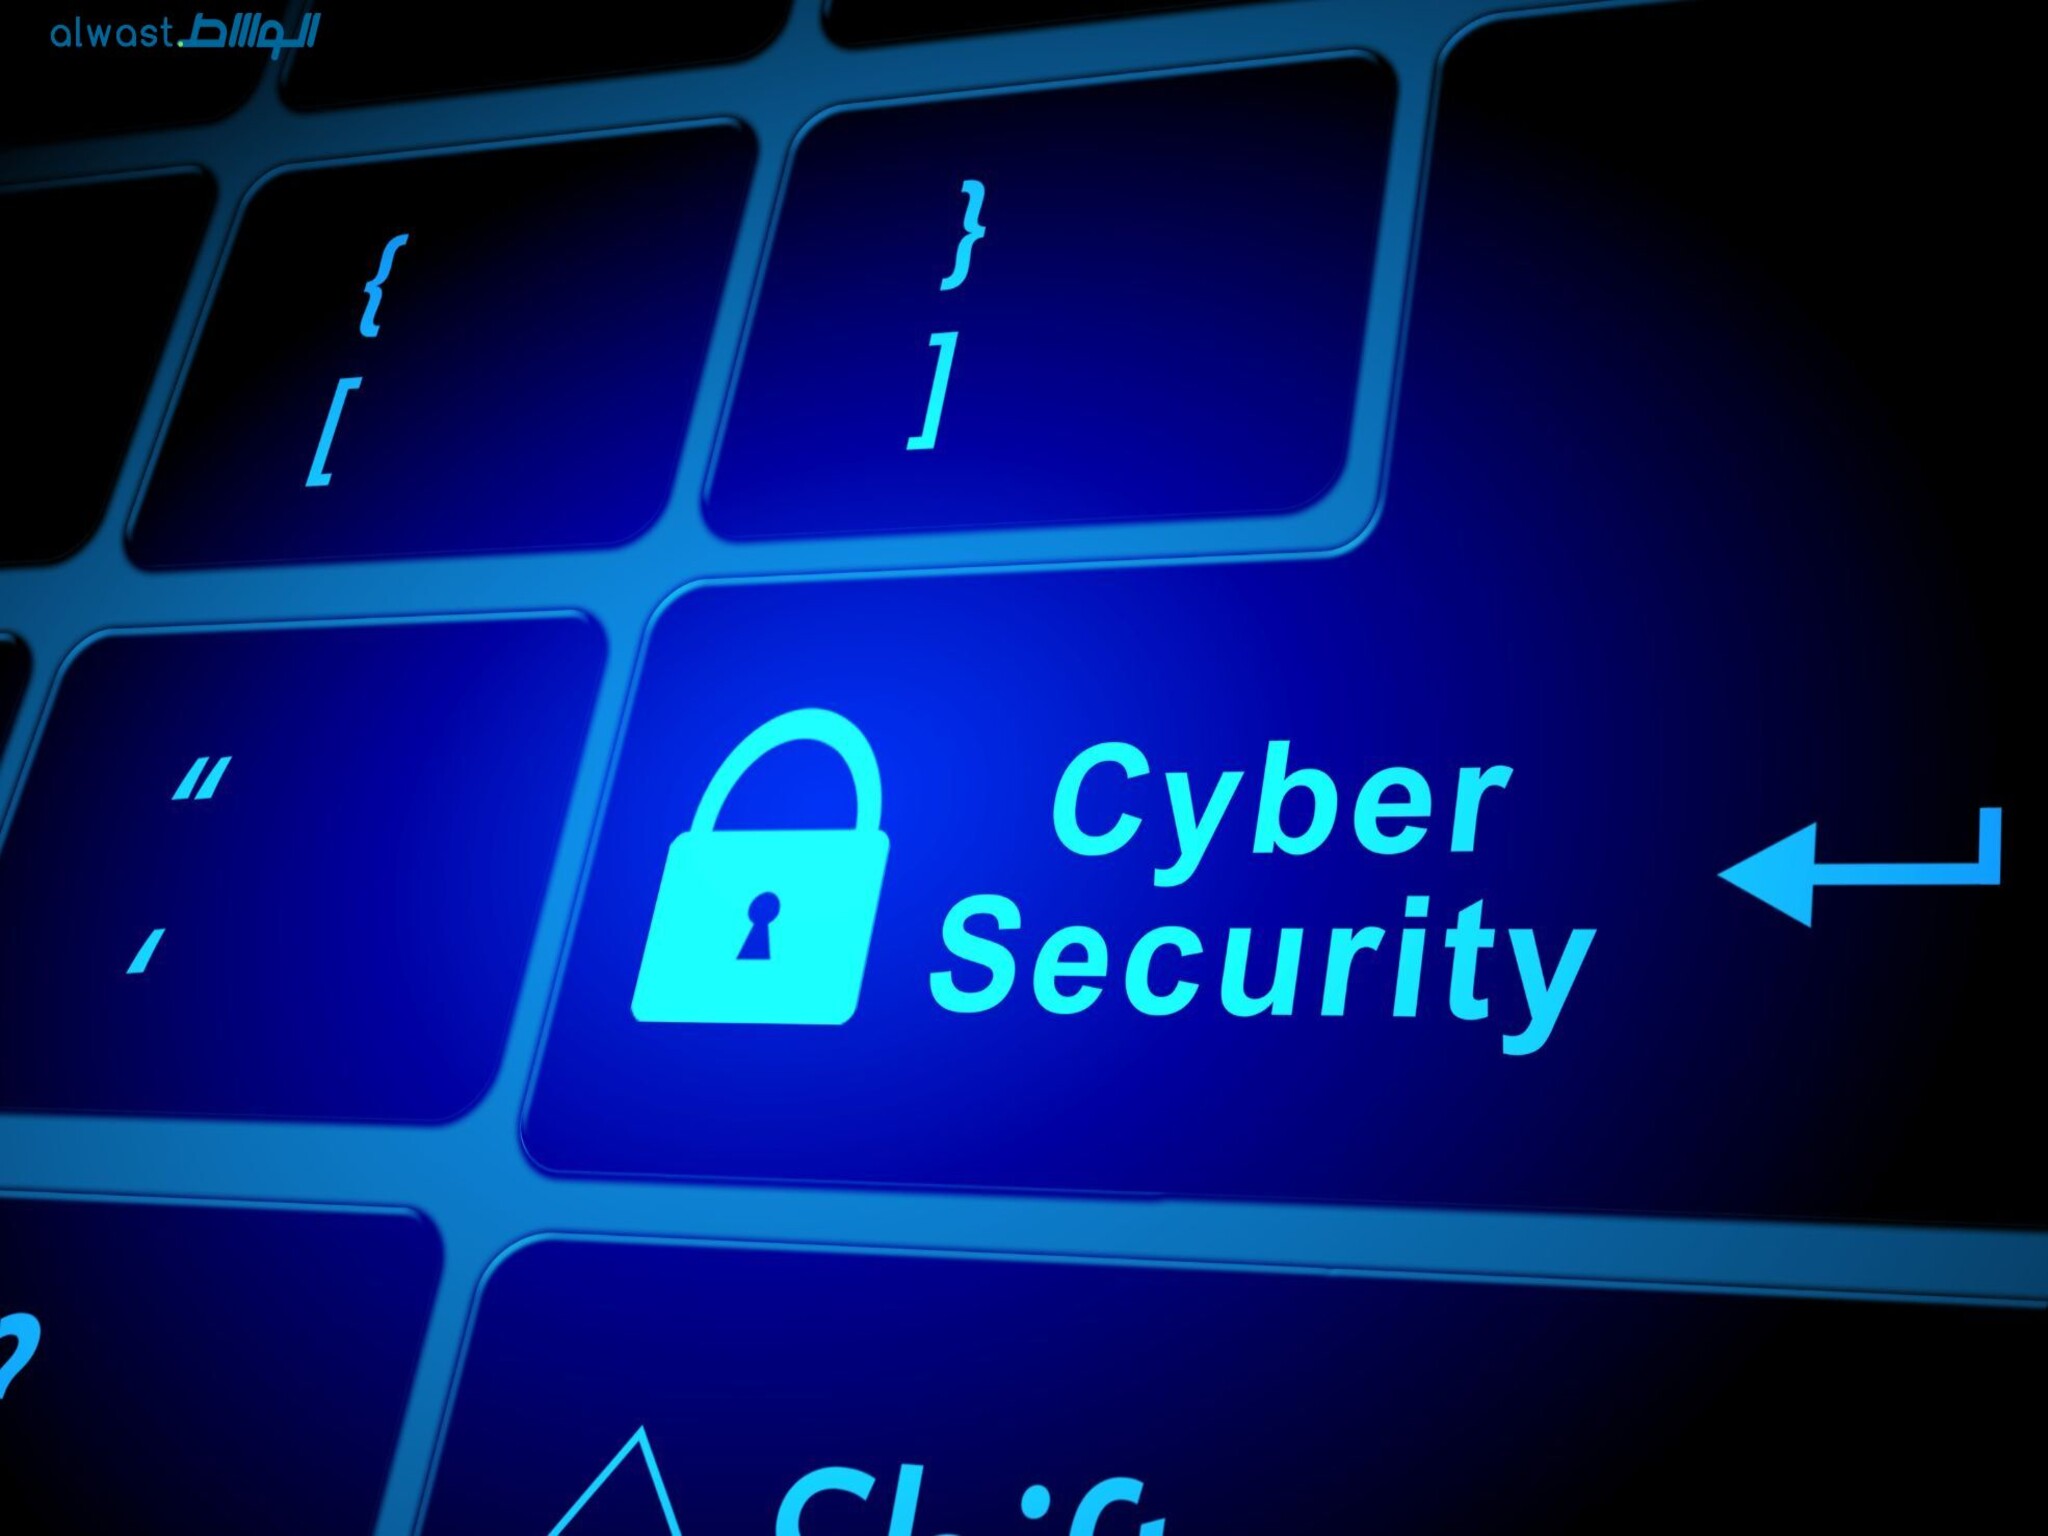 UAE cyber council cautions residents against social engineering attacks